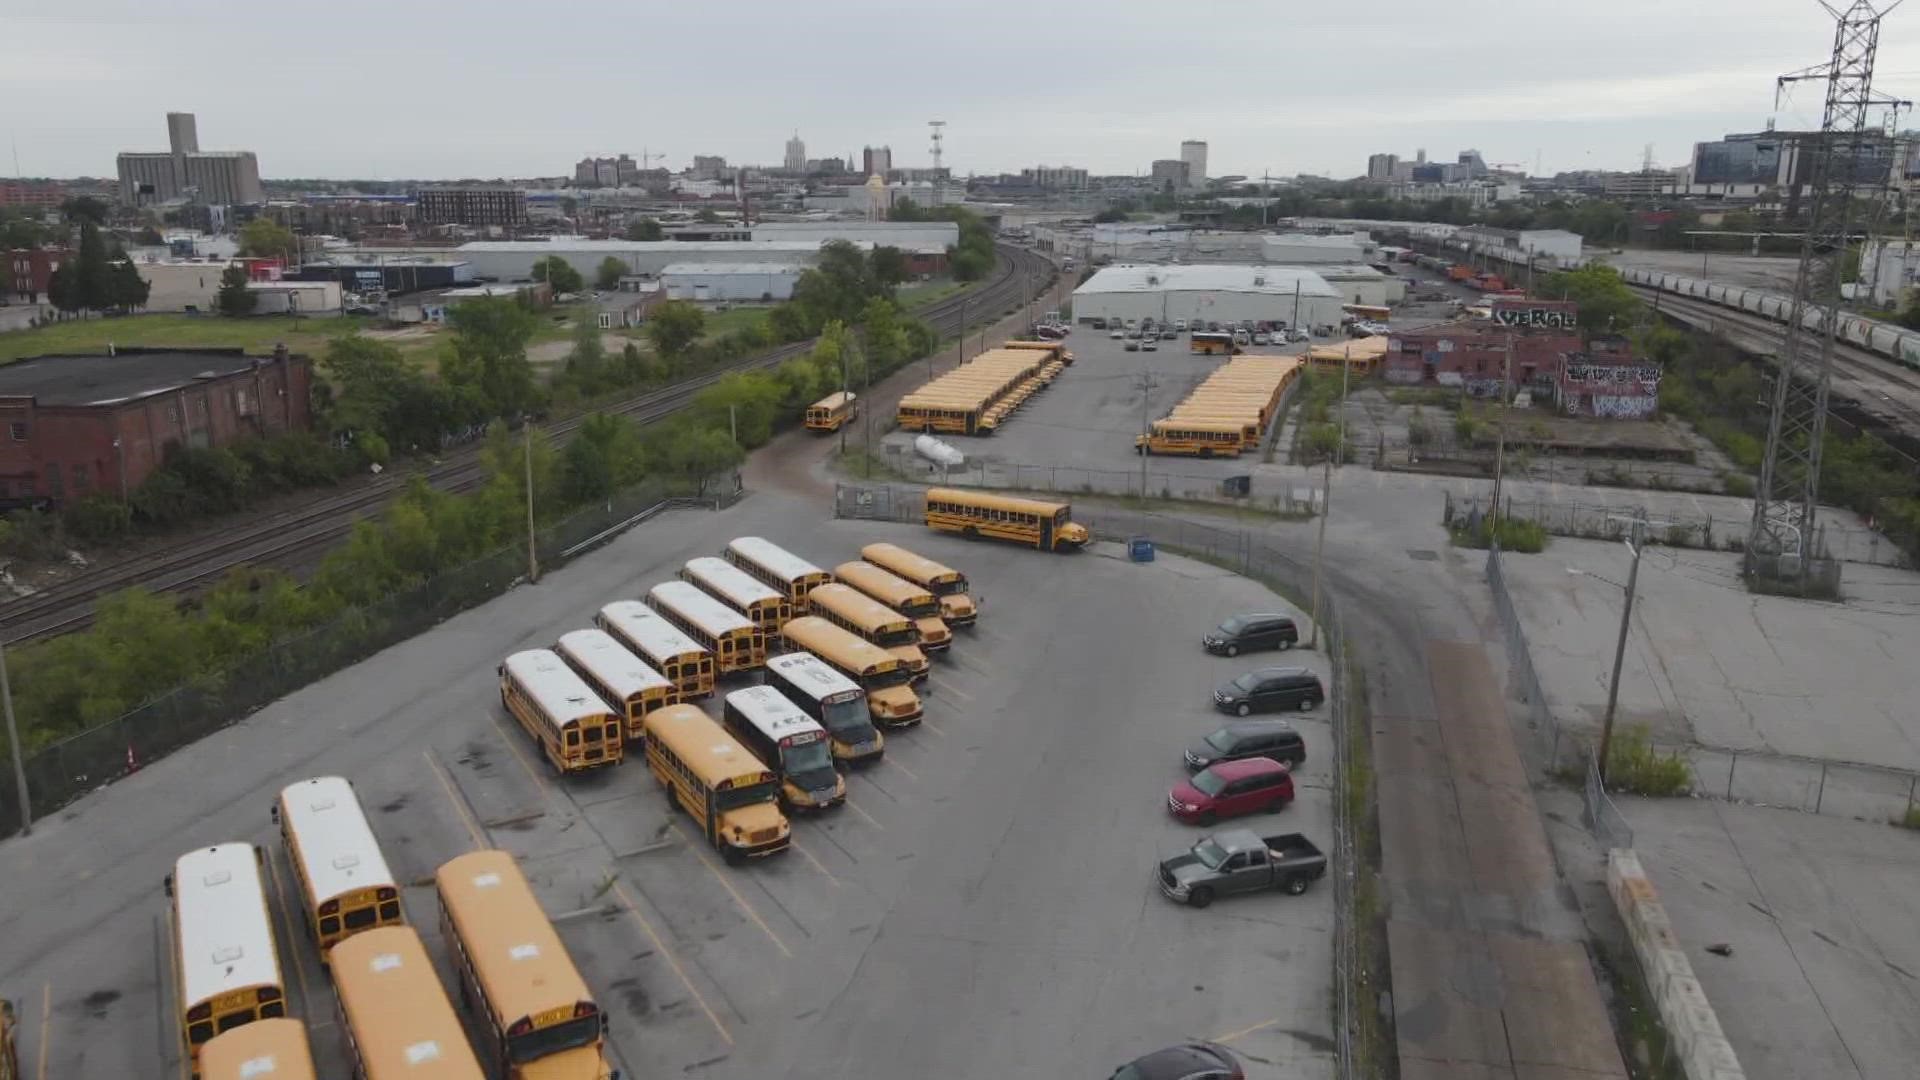 The St. Louis Public school district will be shortening school 10 minutes for all 1st tier schools at the end of day, following bus driver shortage.